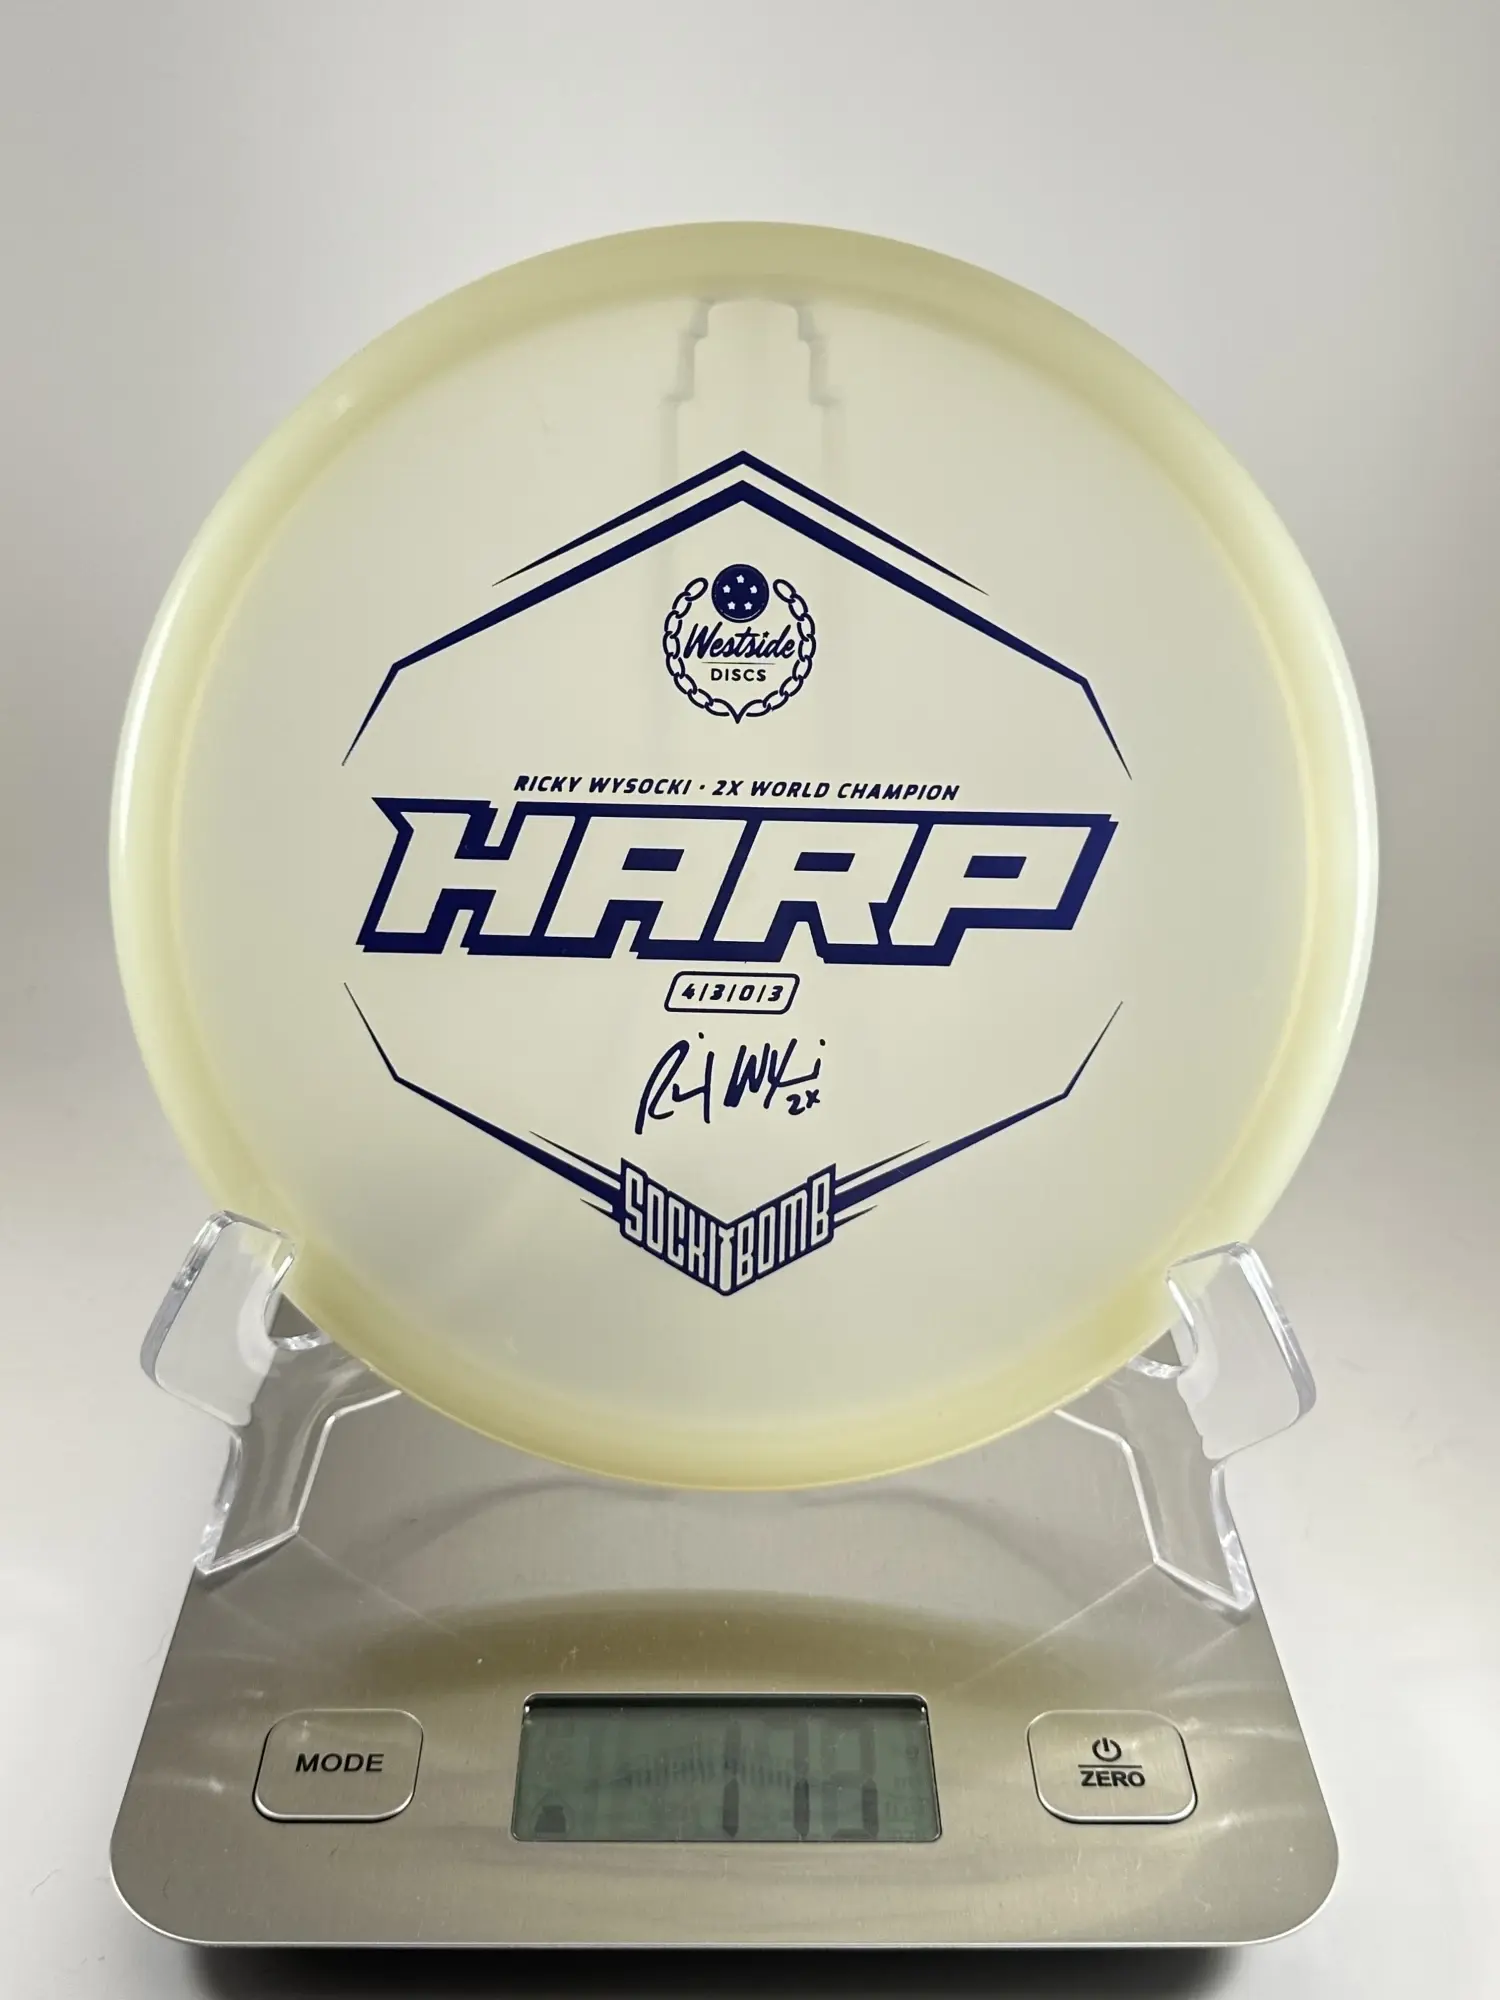 products Westside Discs - Ricky Wysoki Harp Approach Putter Harp GLO